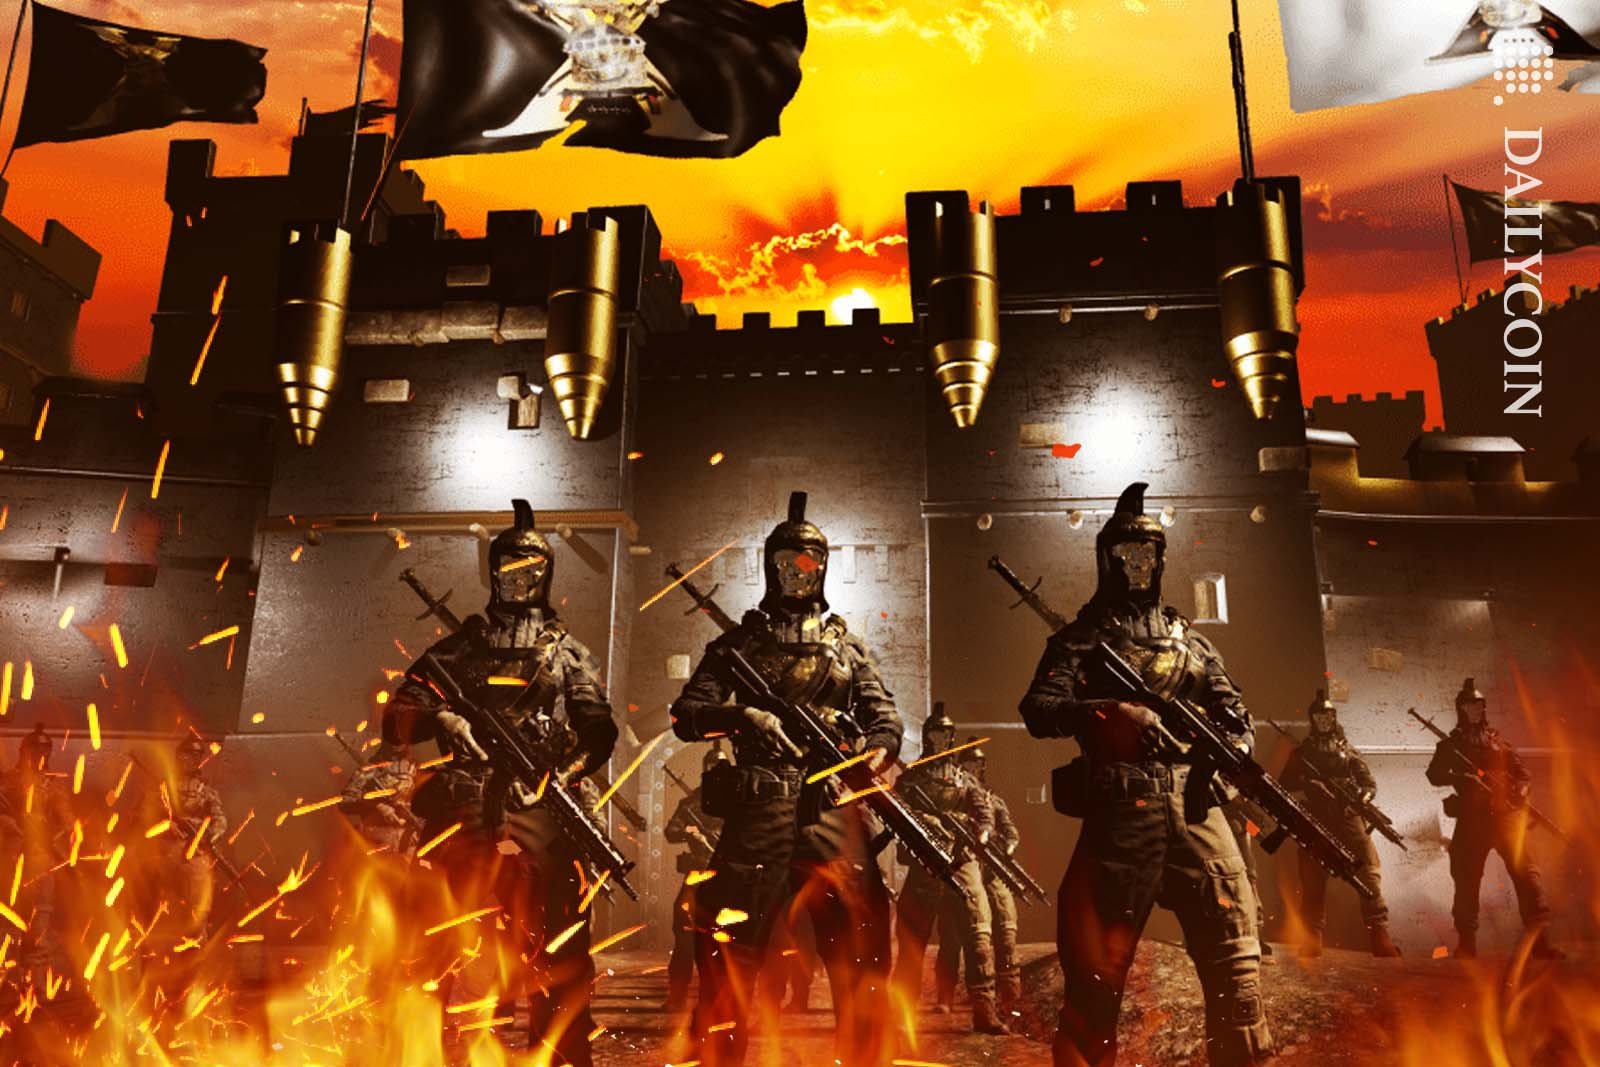 3 chronologically confused soldiers standing infront of a burning fortress.